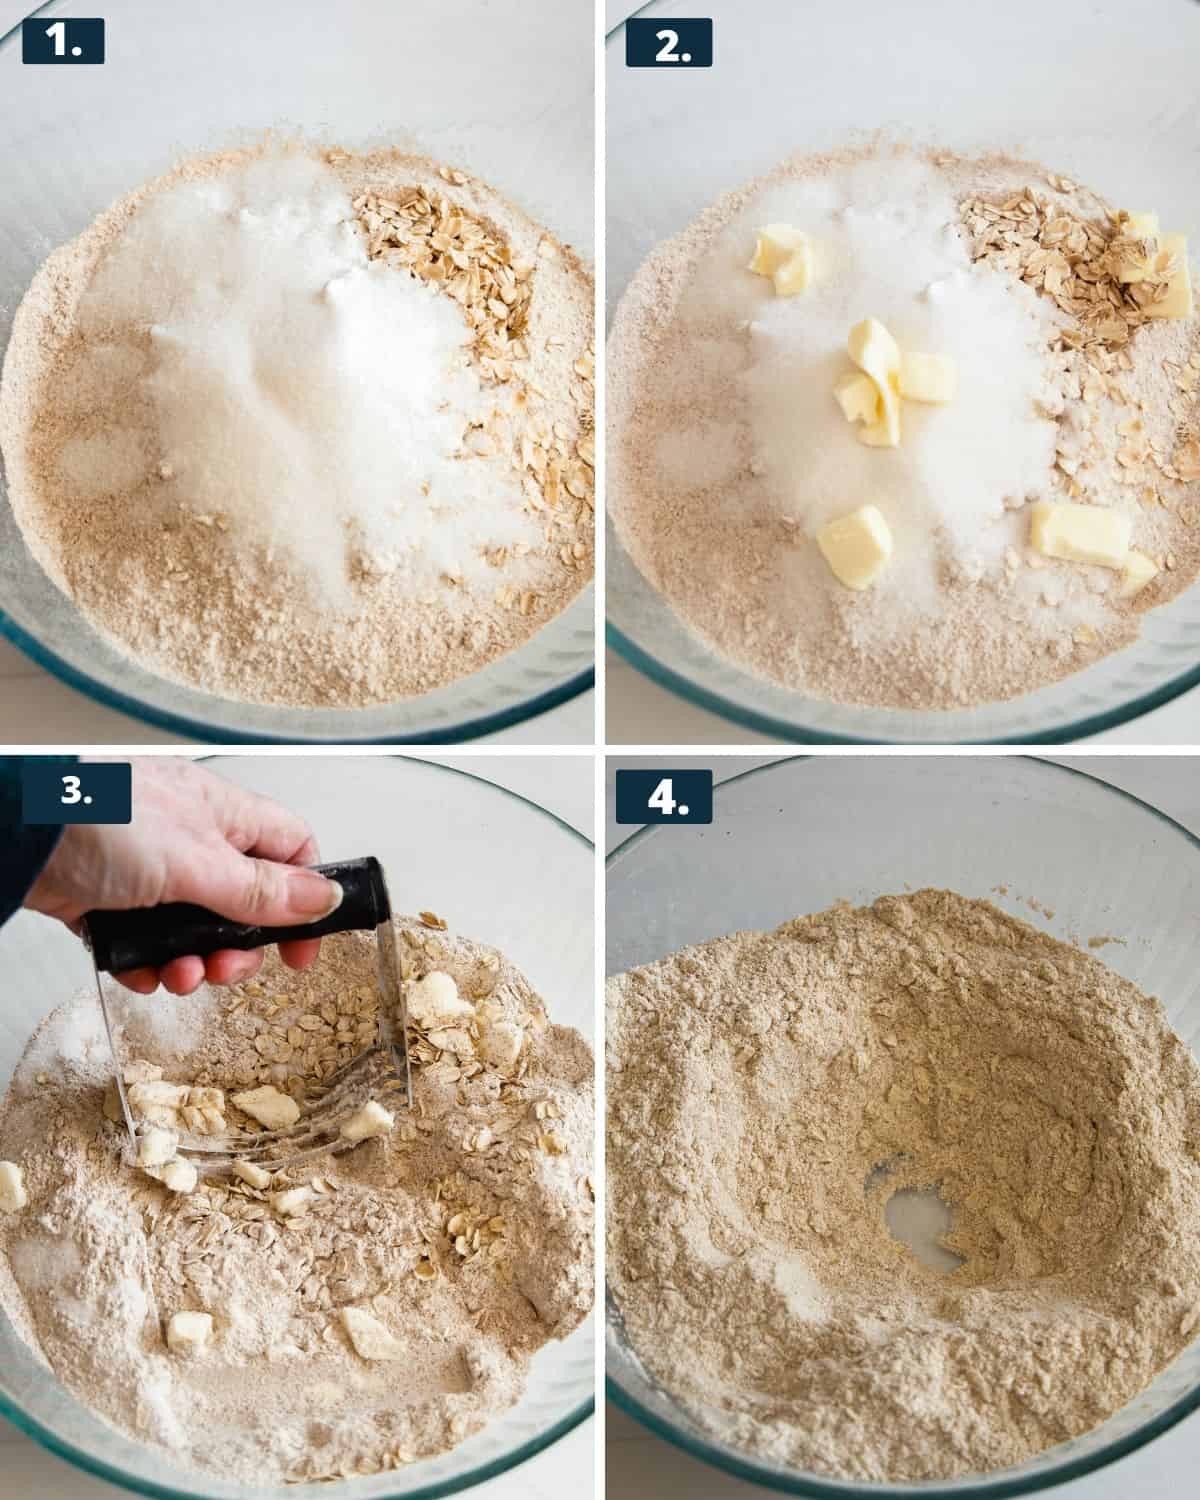 steps to make brown bread, 1: Dry ingredients whole wheat flour and sugar, 2nd photo the dry ingredients have been topped with cut butter 3, A hand in the bowl holding a pastry cutter that is cutting the butter into the flour 4, the glass bowl with the flour and butter all mixed with a well in the center for wet ingredients.